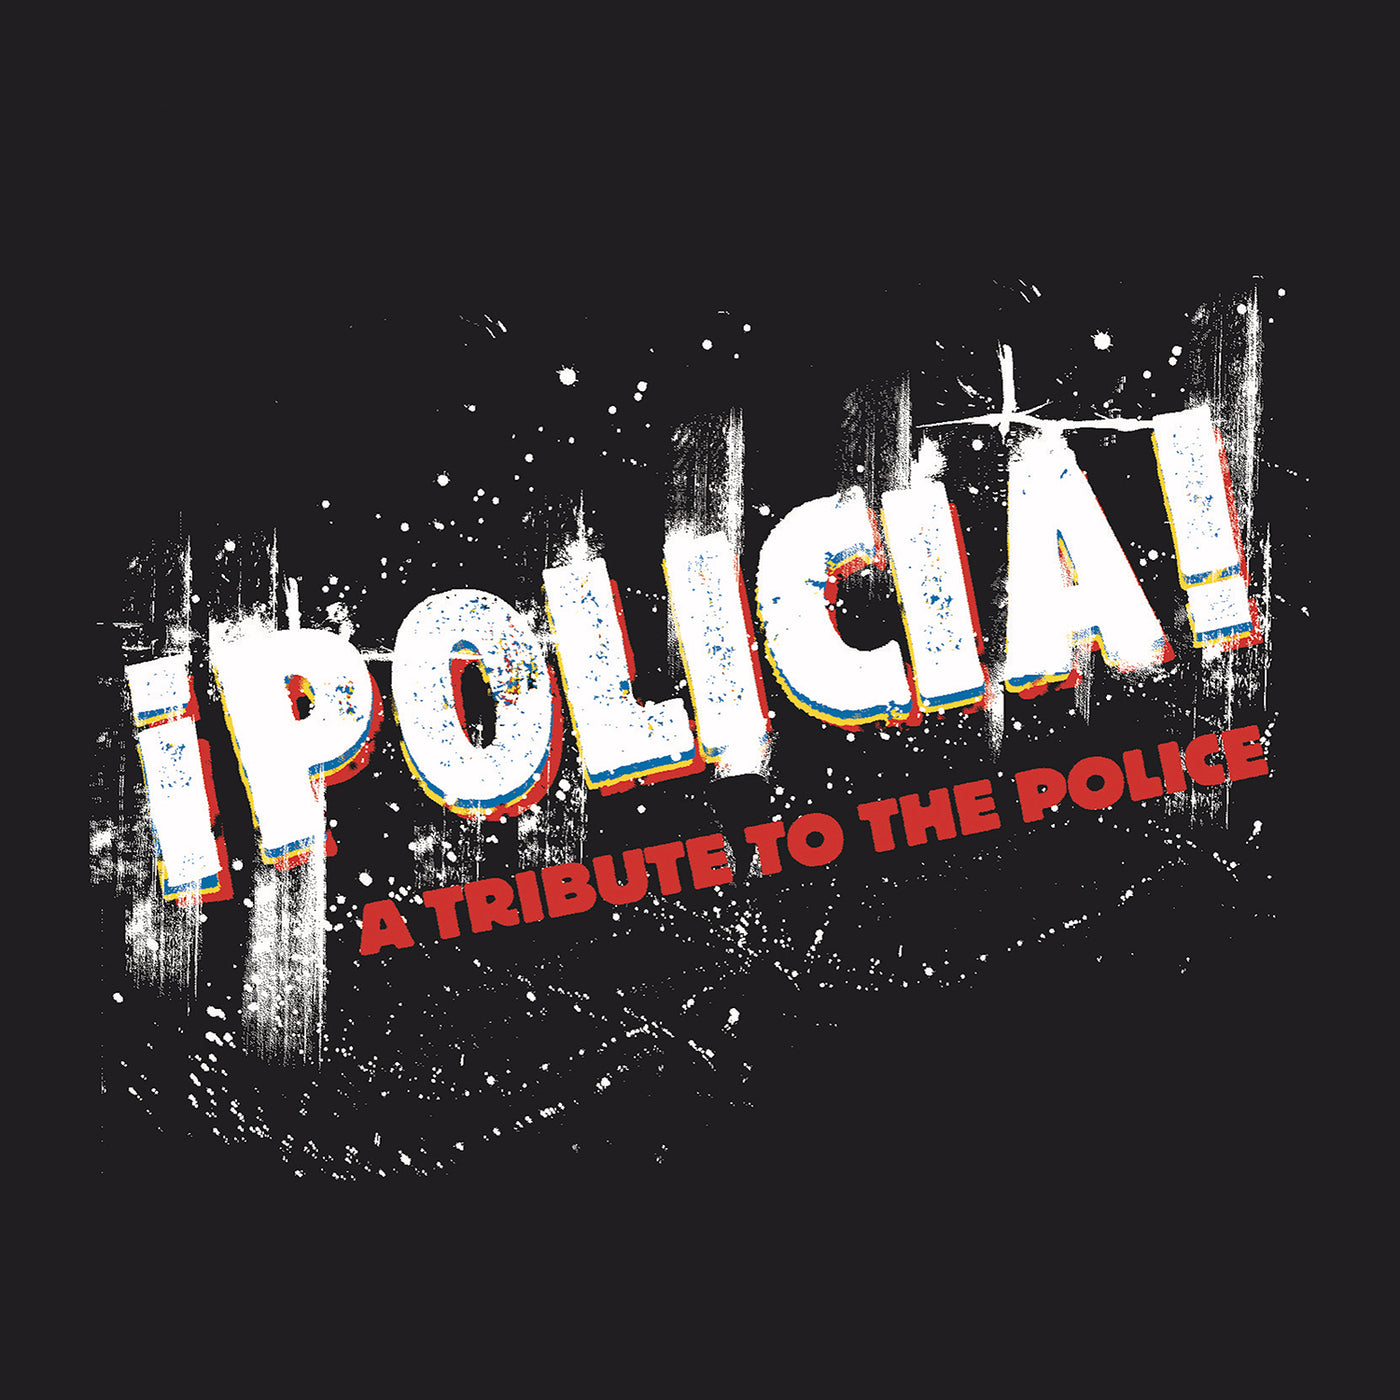 ¡Policia! - A Tribute To The Police 2xLP